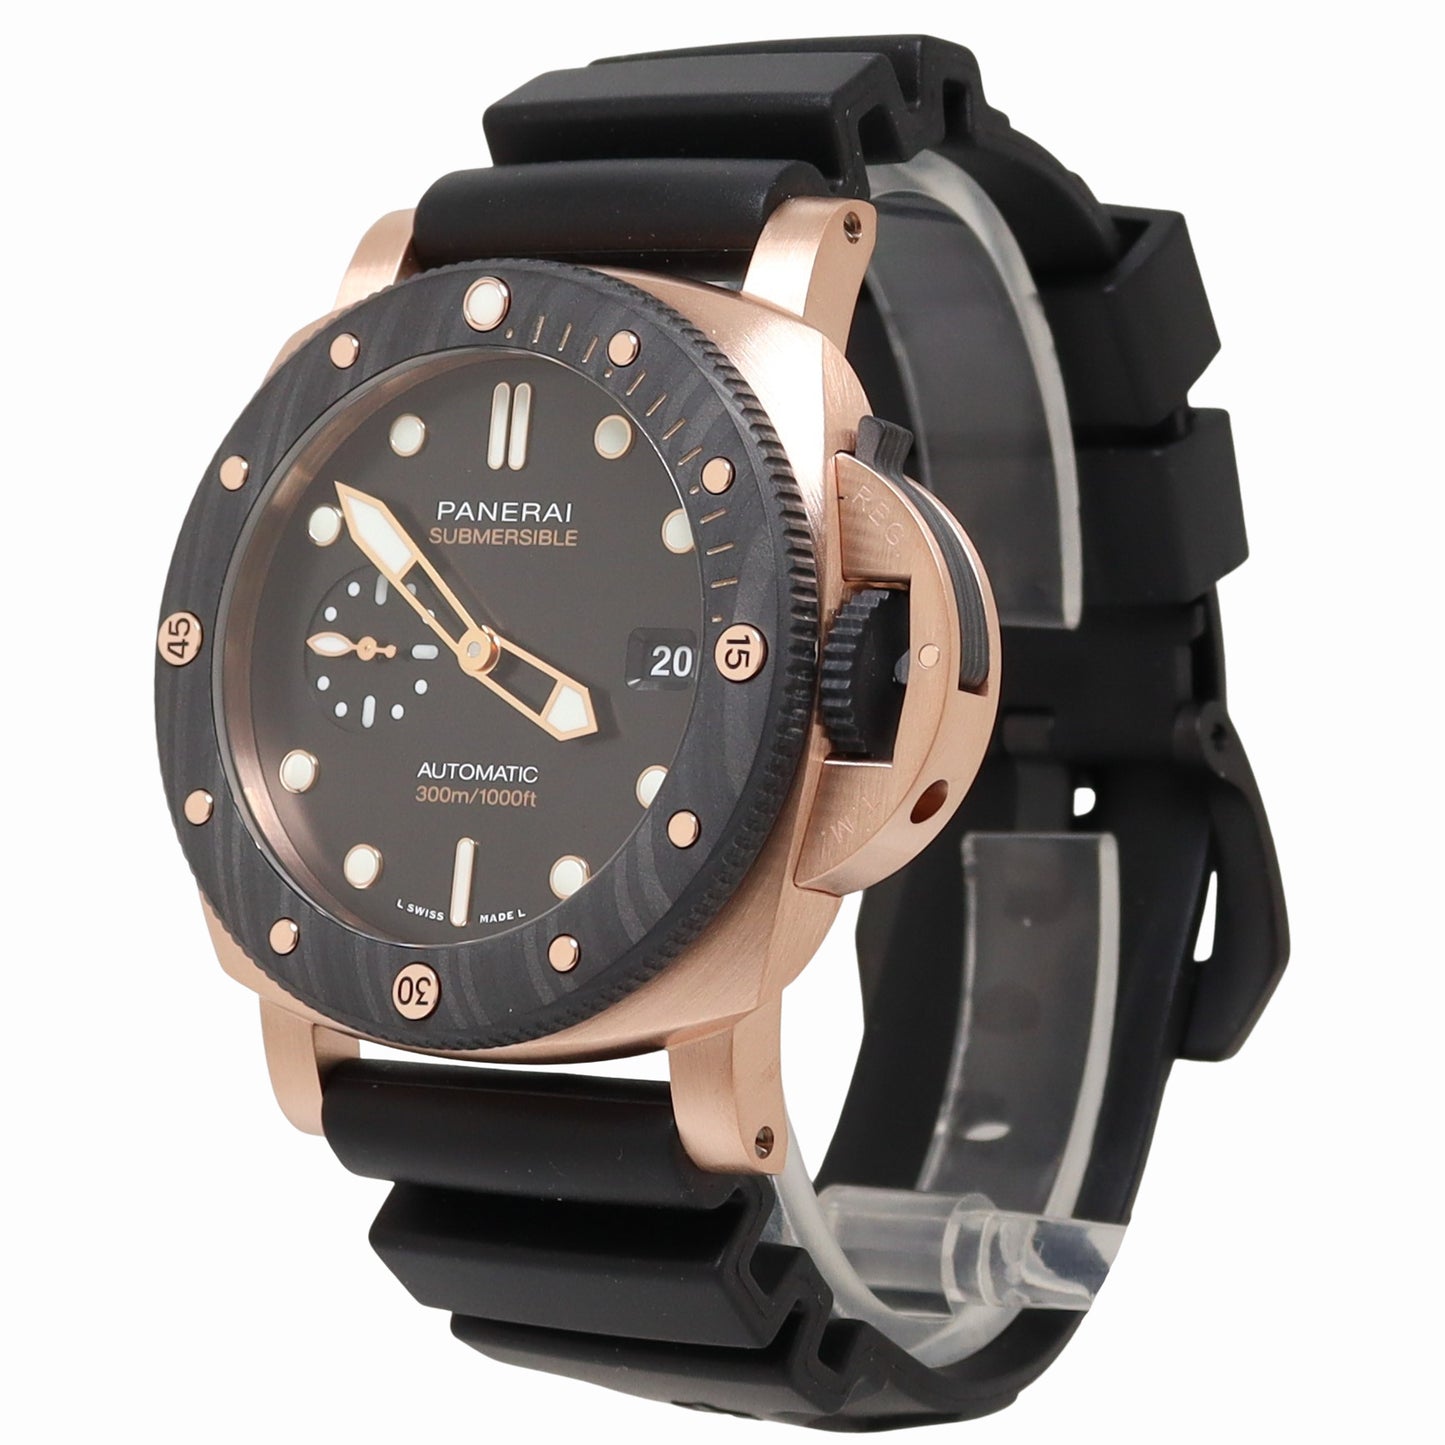 Panerai Submersible Rose Gold 44mm Black Dial Watch Reference# PAM02070 - Happy Jewelers Fine Jewelry Lifetime Warranty